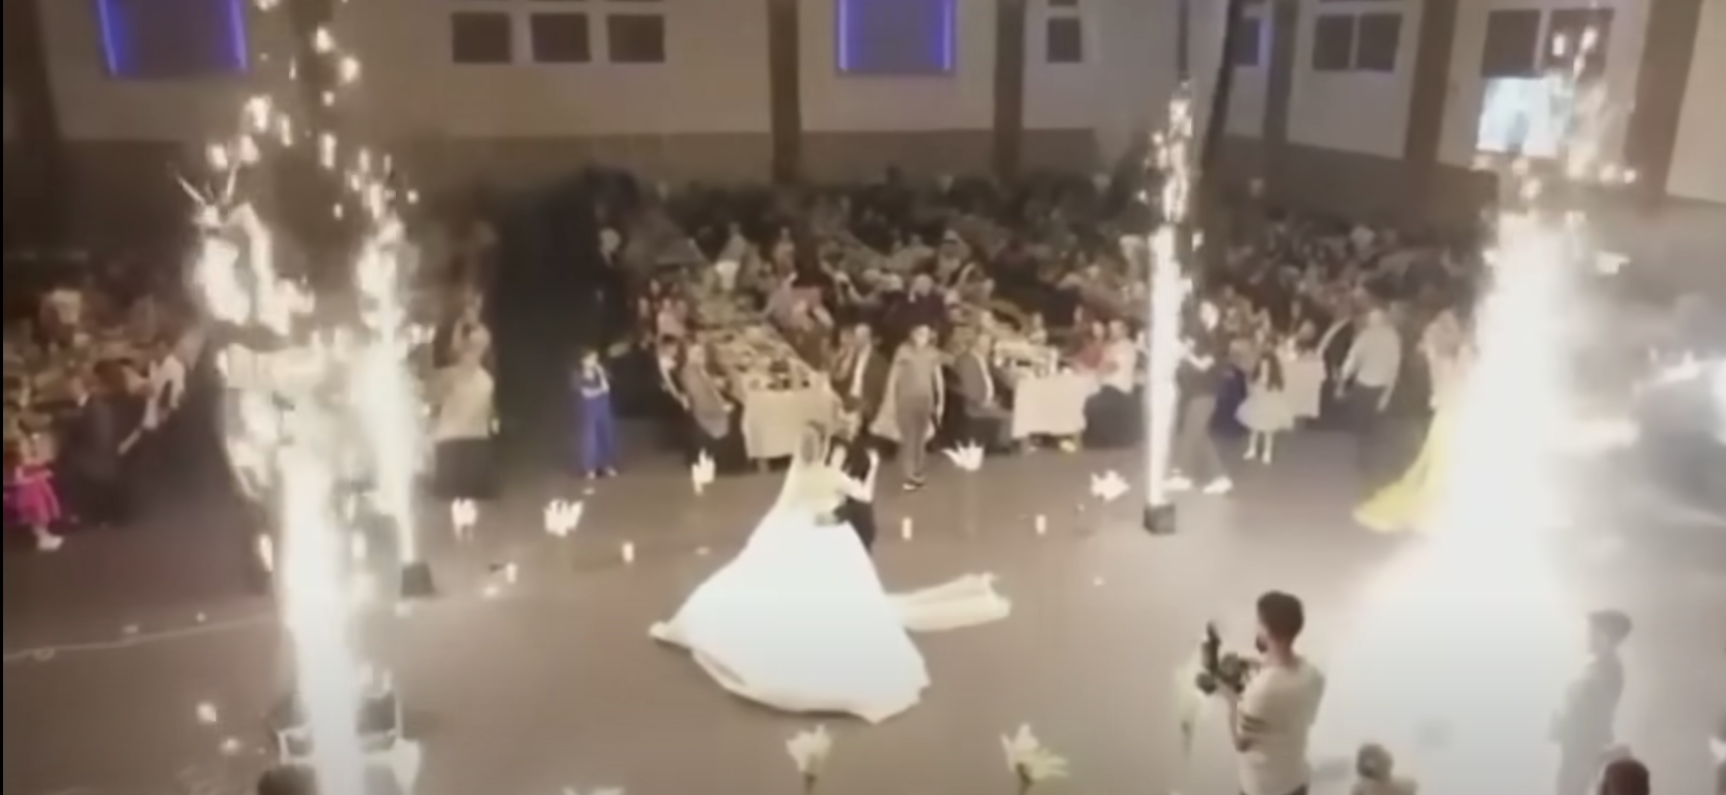 Flares going off as Haneen and Revan Isho danced at their wedding | Source: youtube.com/@SkyNews